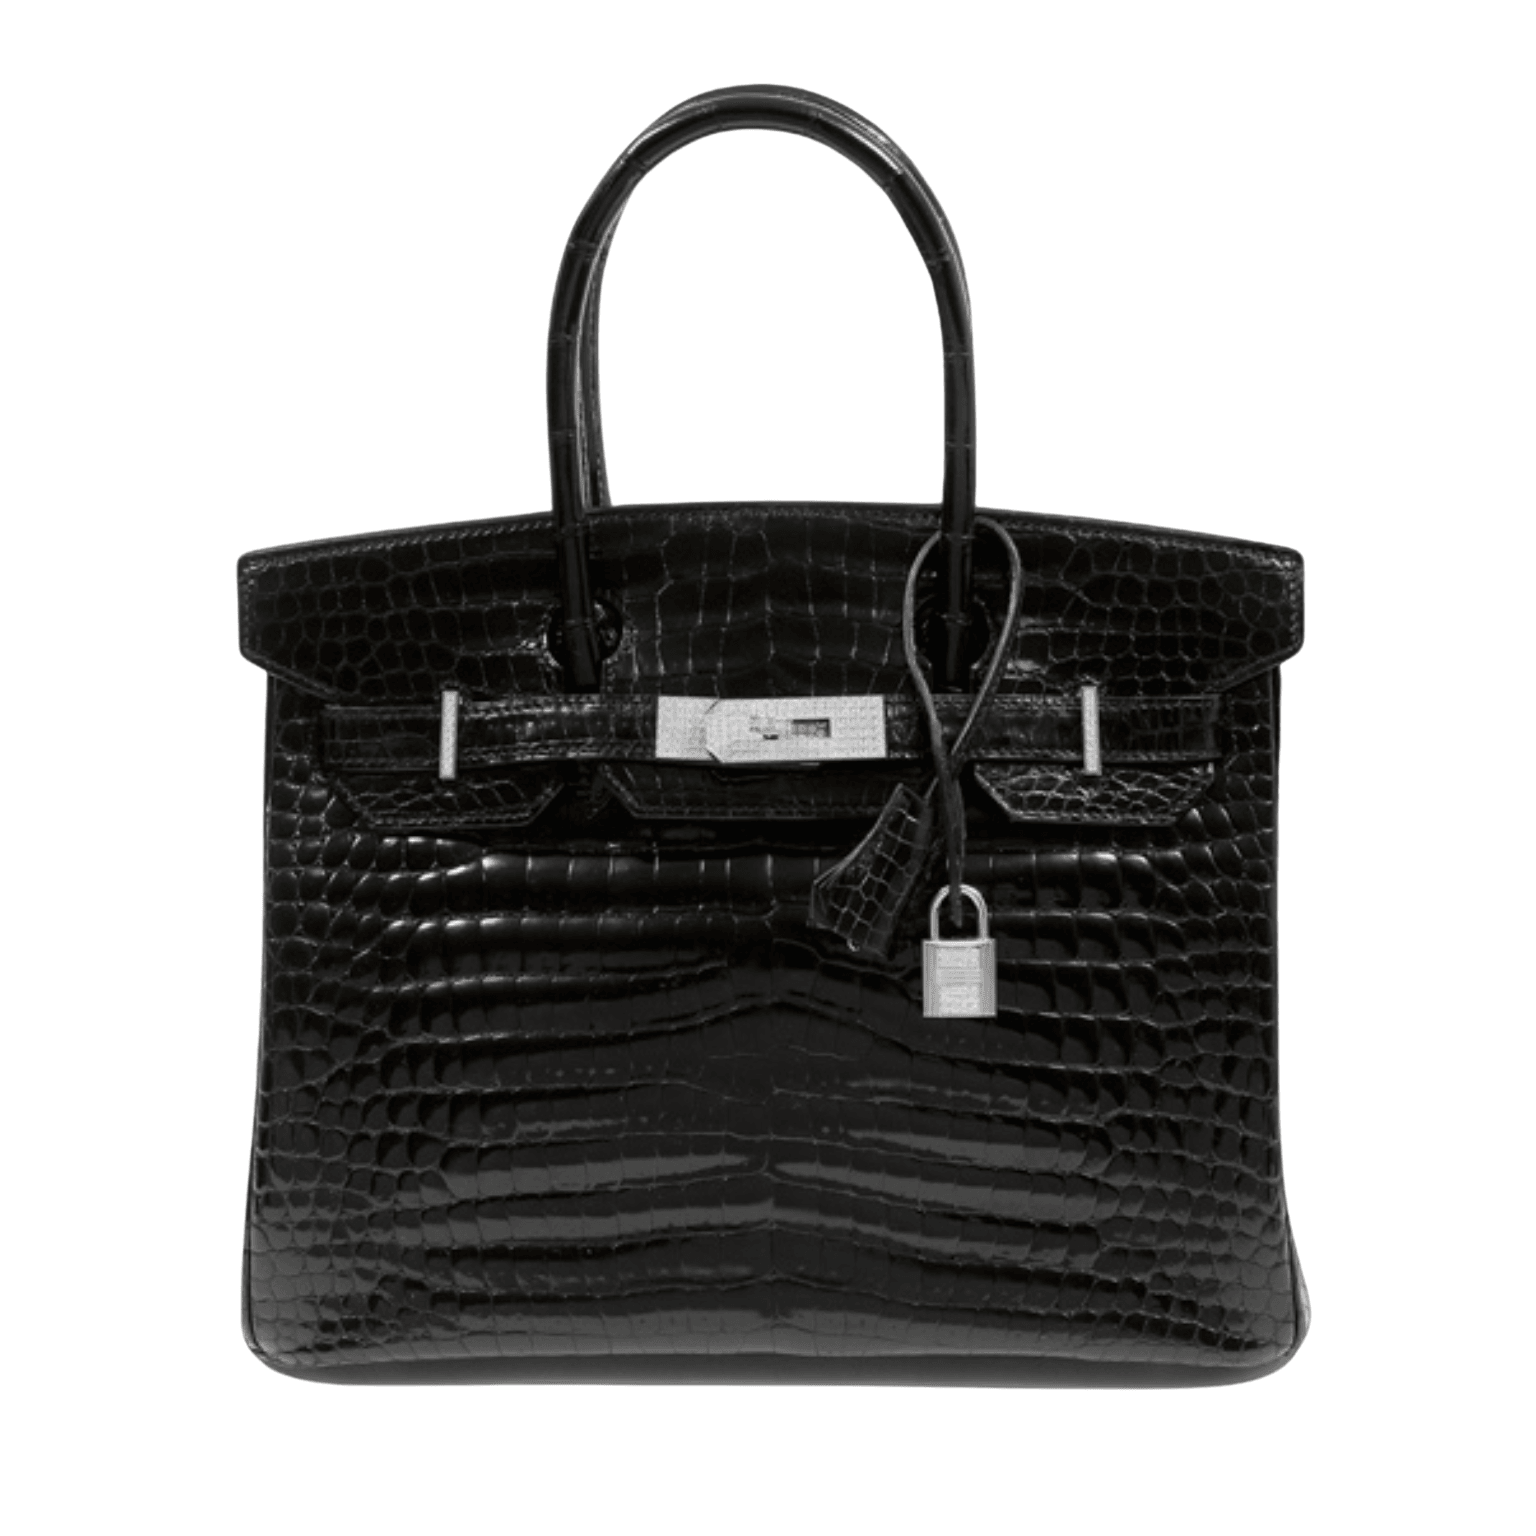 Only Authentics the finest Hermès, Chanel bag at 325 Worth Ave Palm Beach  FL 33480 Valentina 